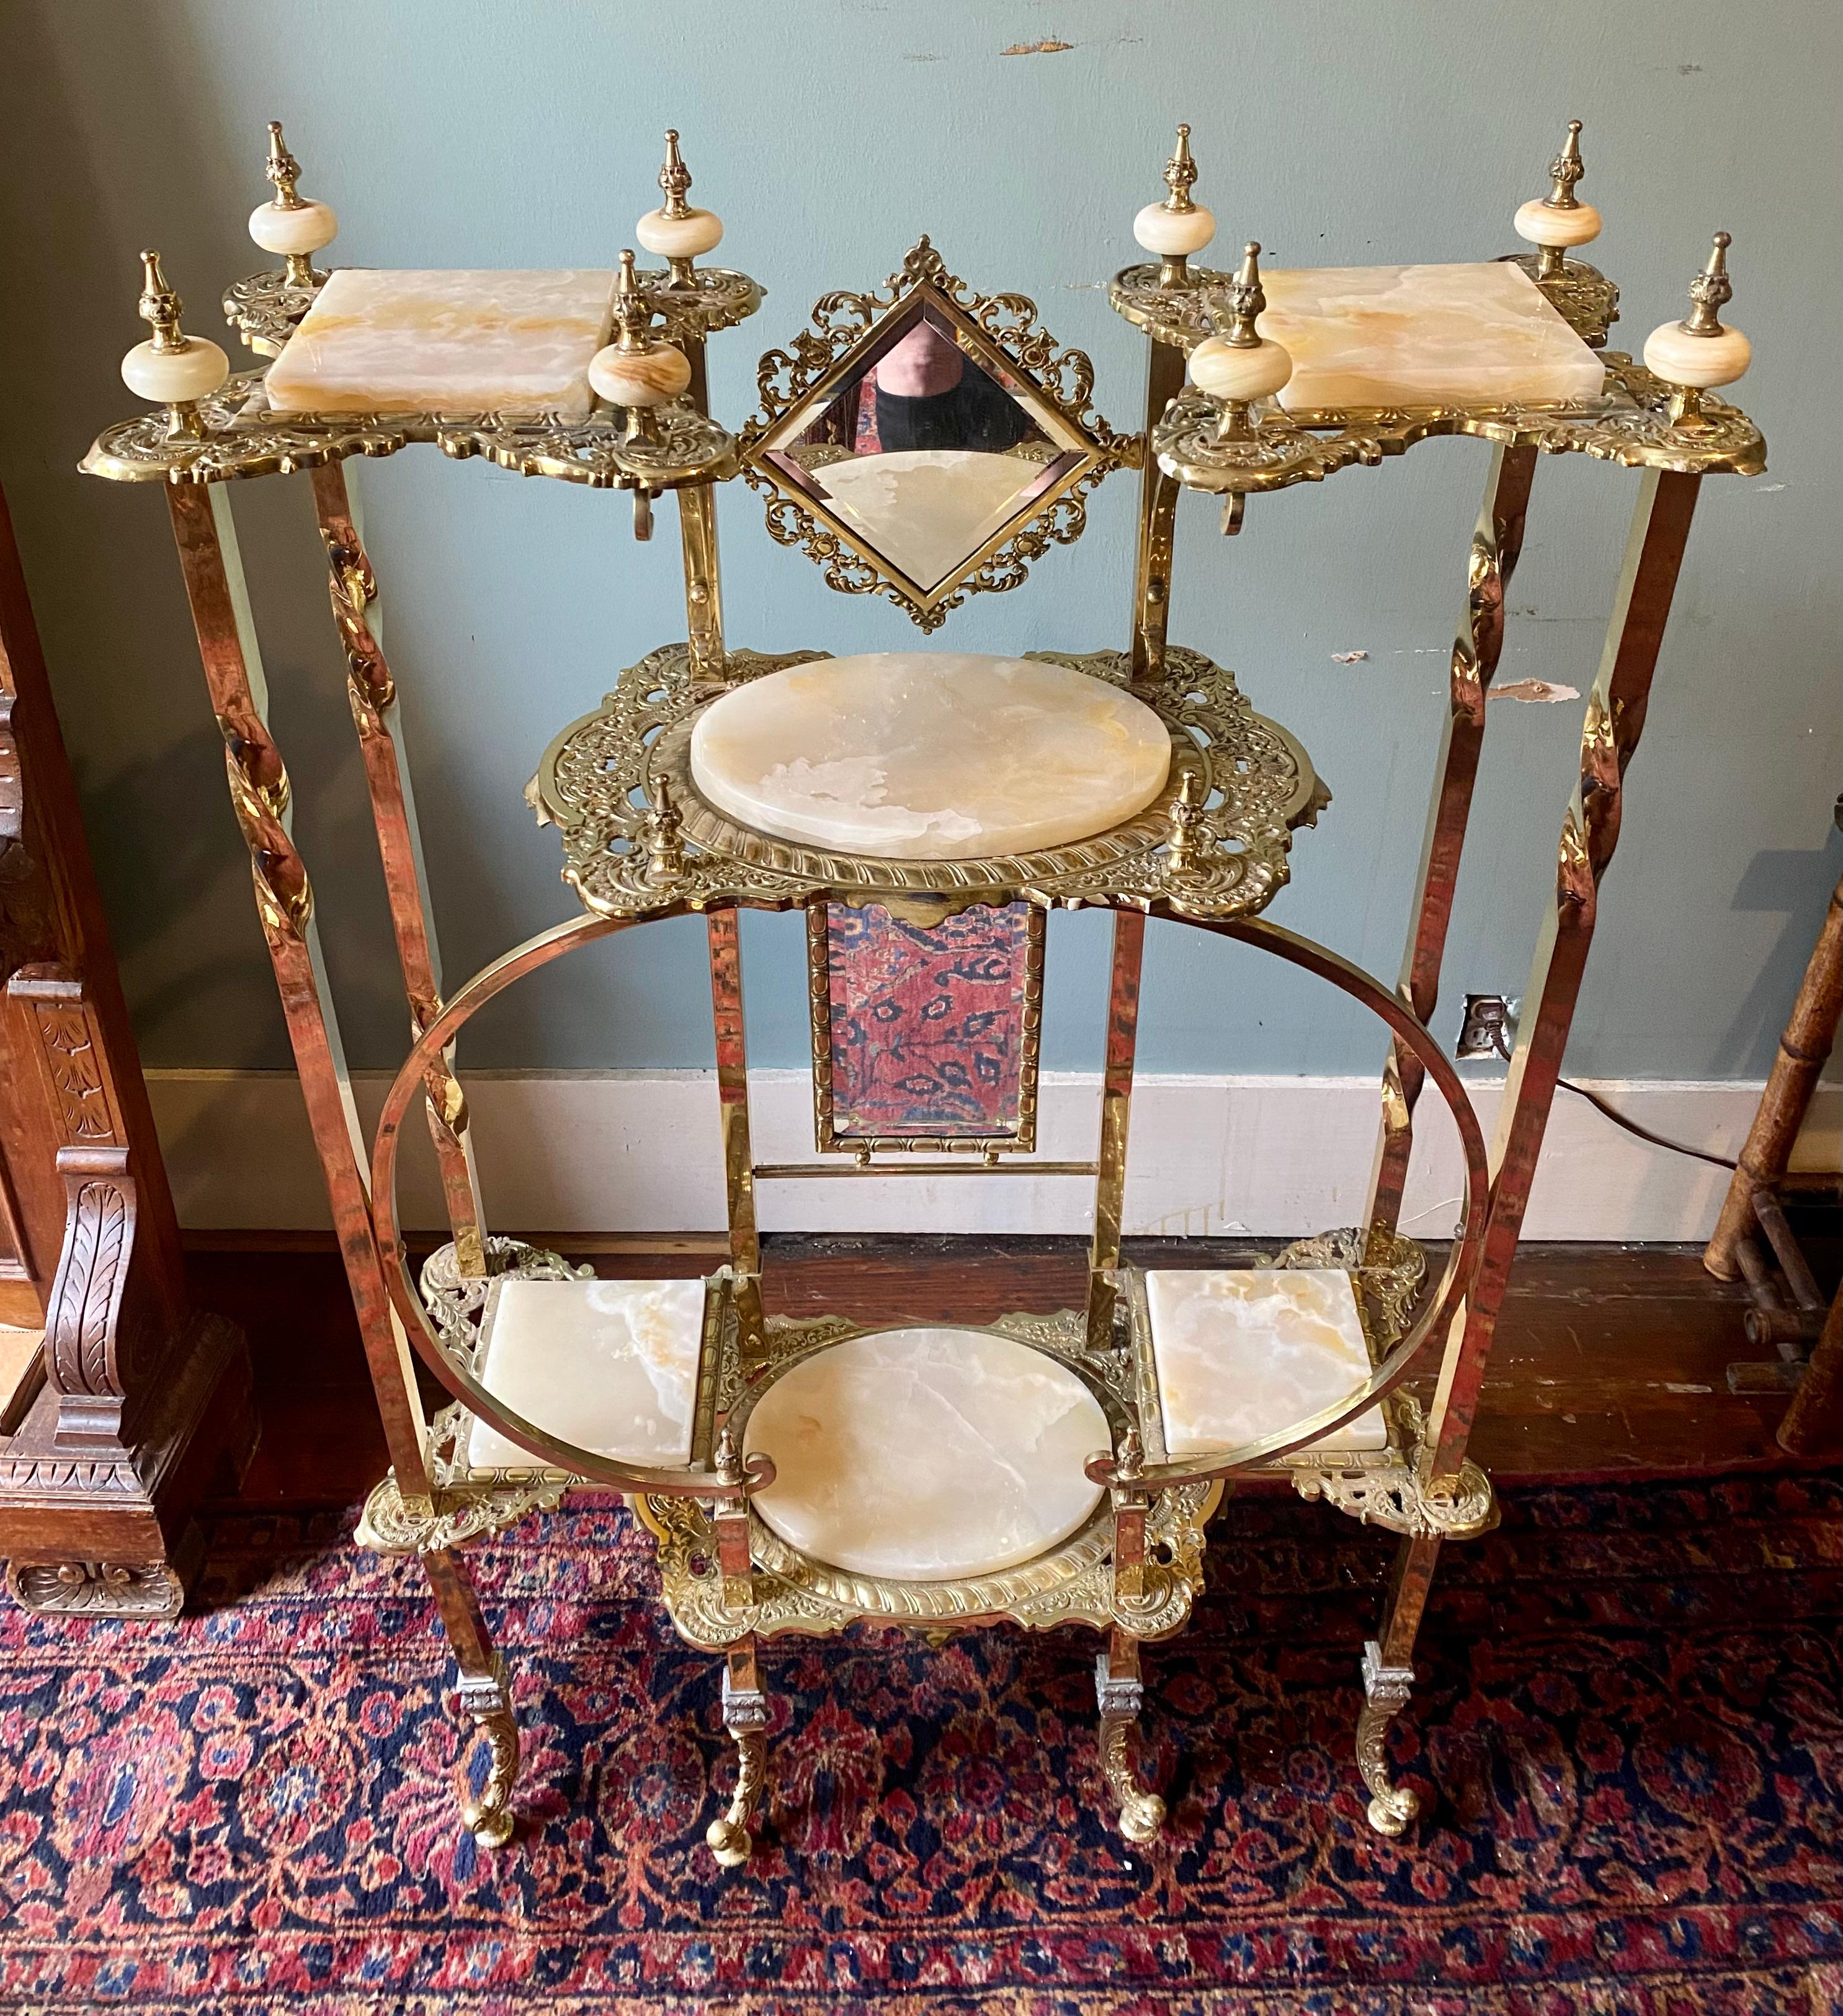 Antique English High Victorian Brass and Onyx Mirrored Etagere, Circa 1890-1910 2